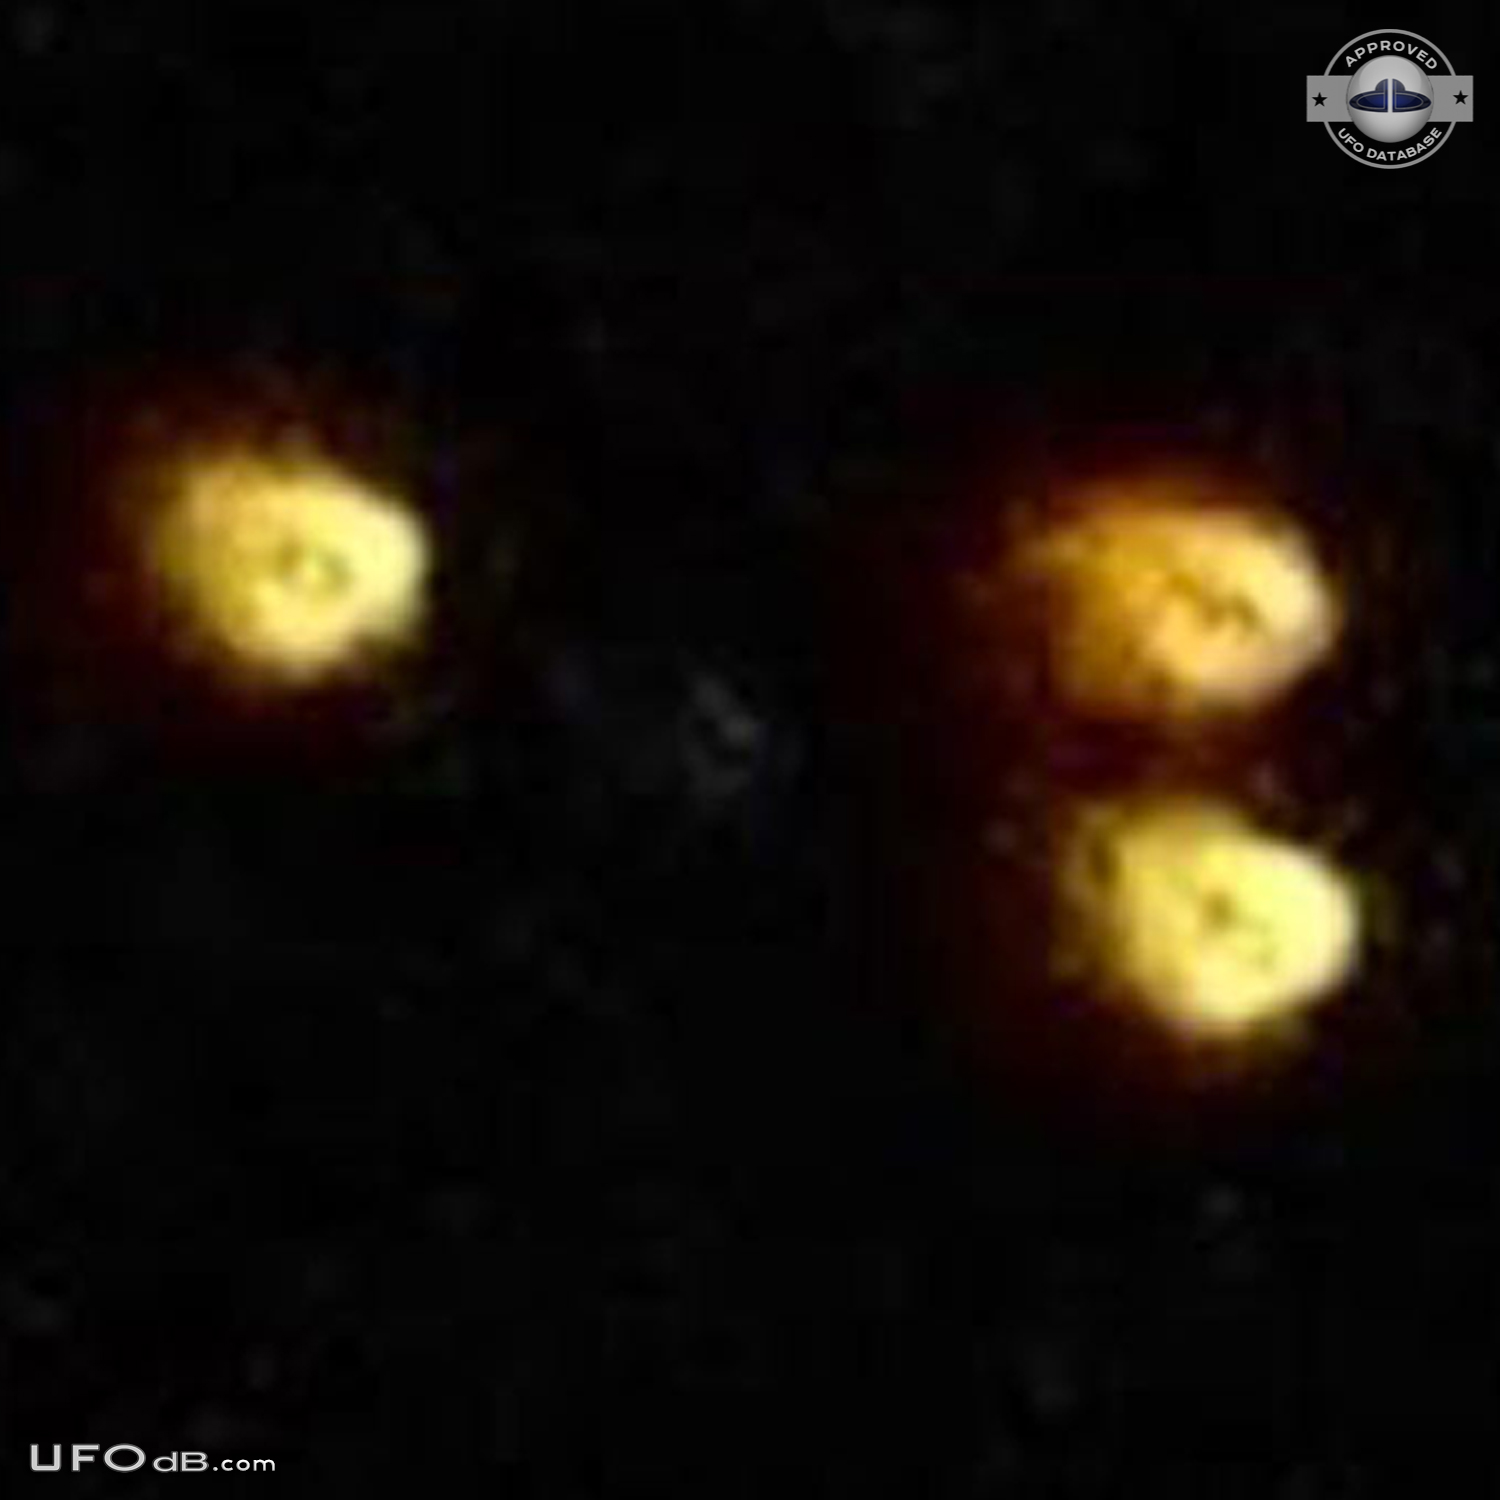 UFO picture with 3 firebals in a triangular formation - Argentina 2011 UFO Picture #408-3